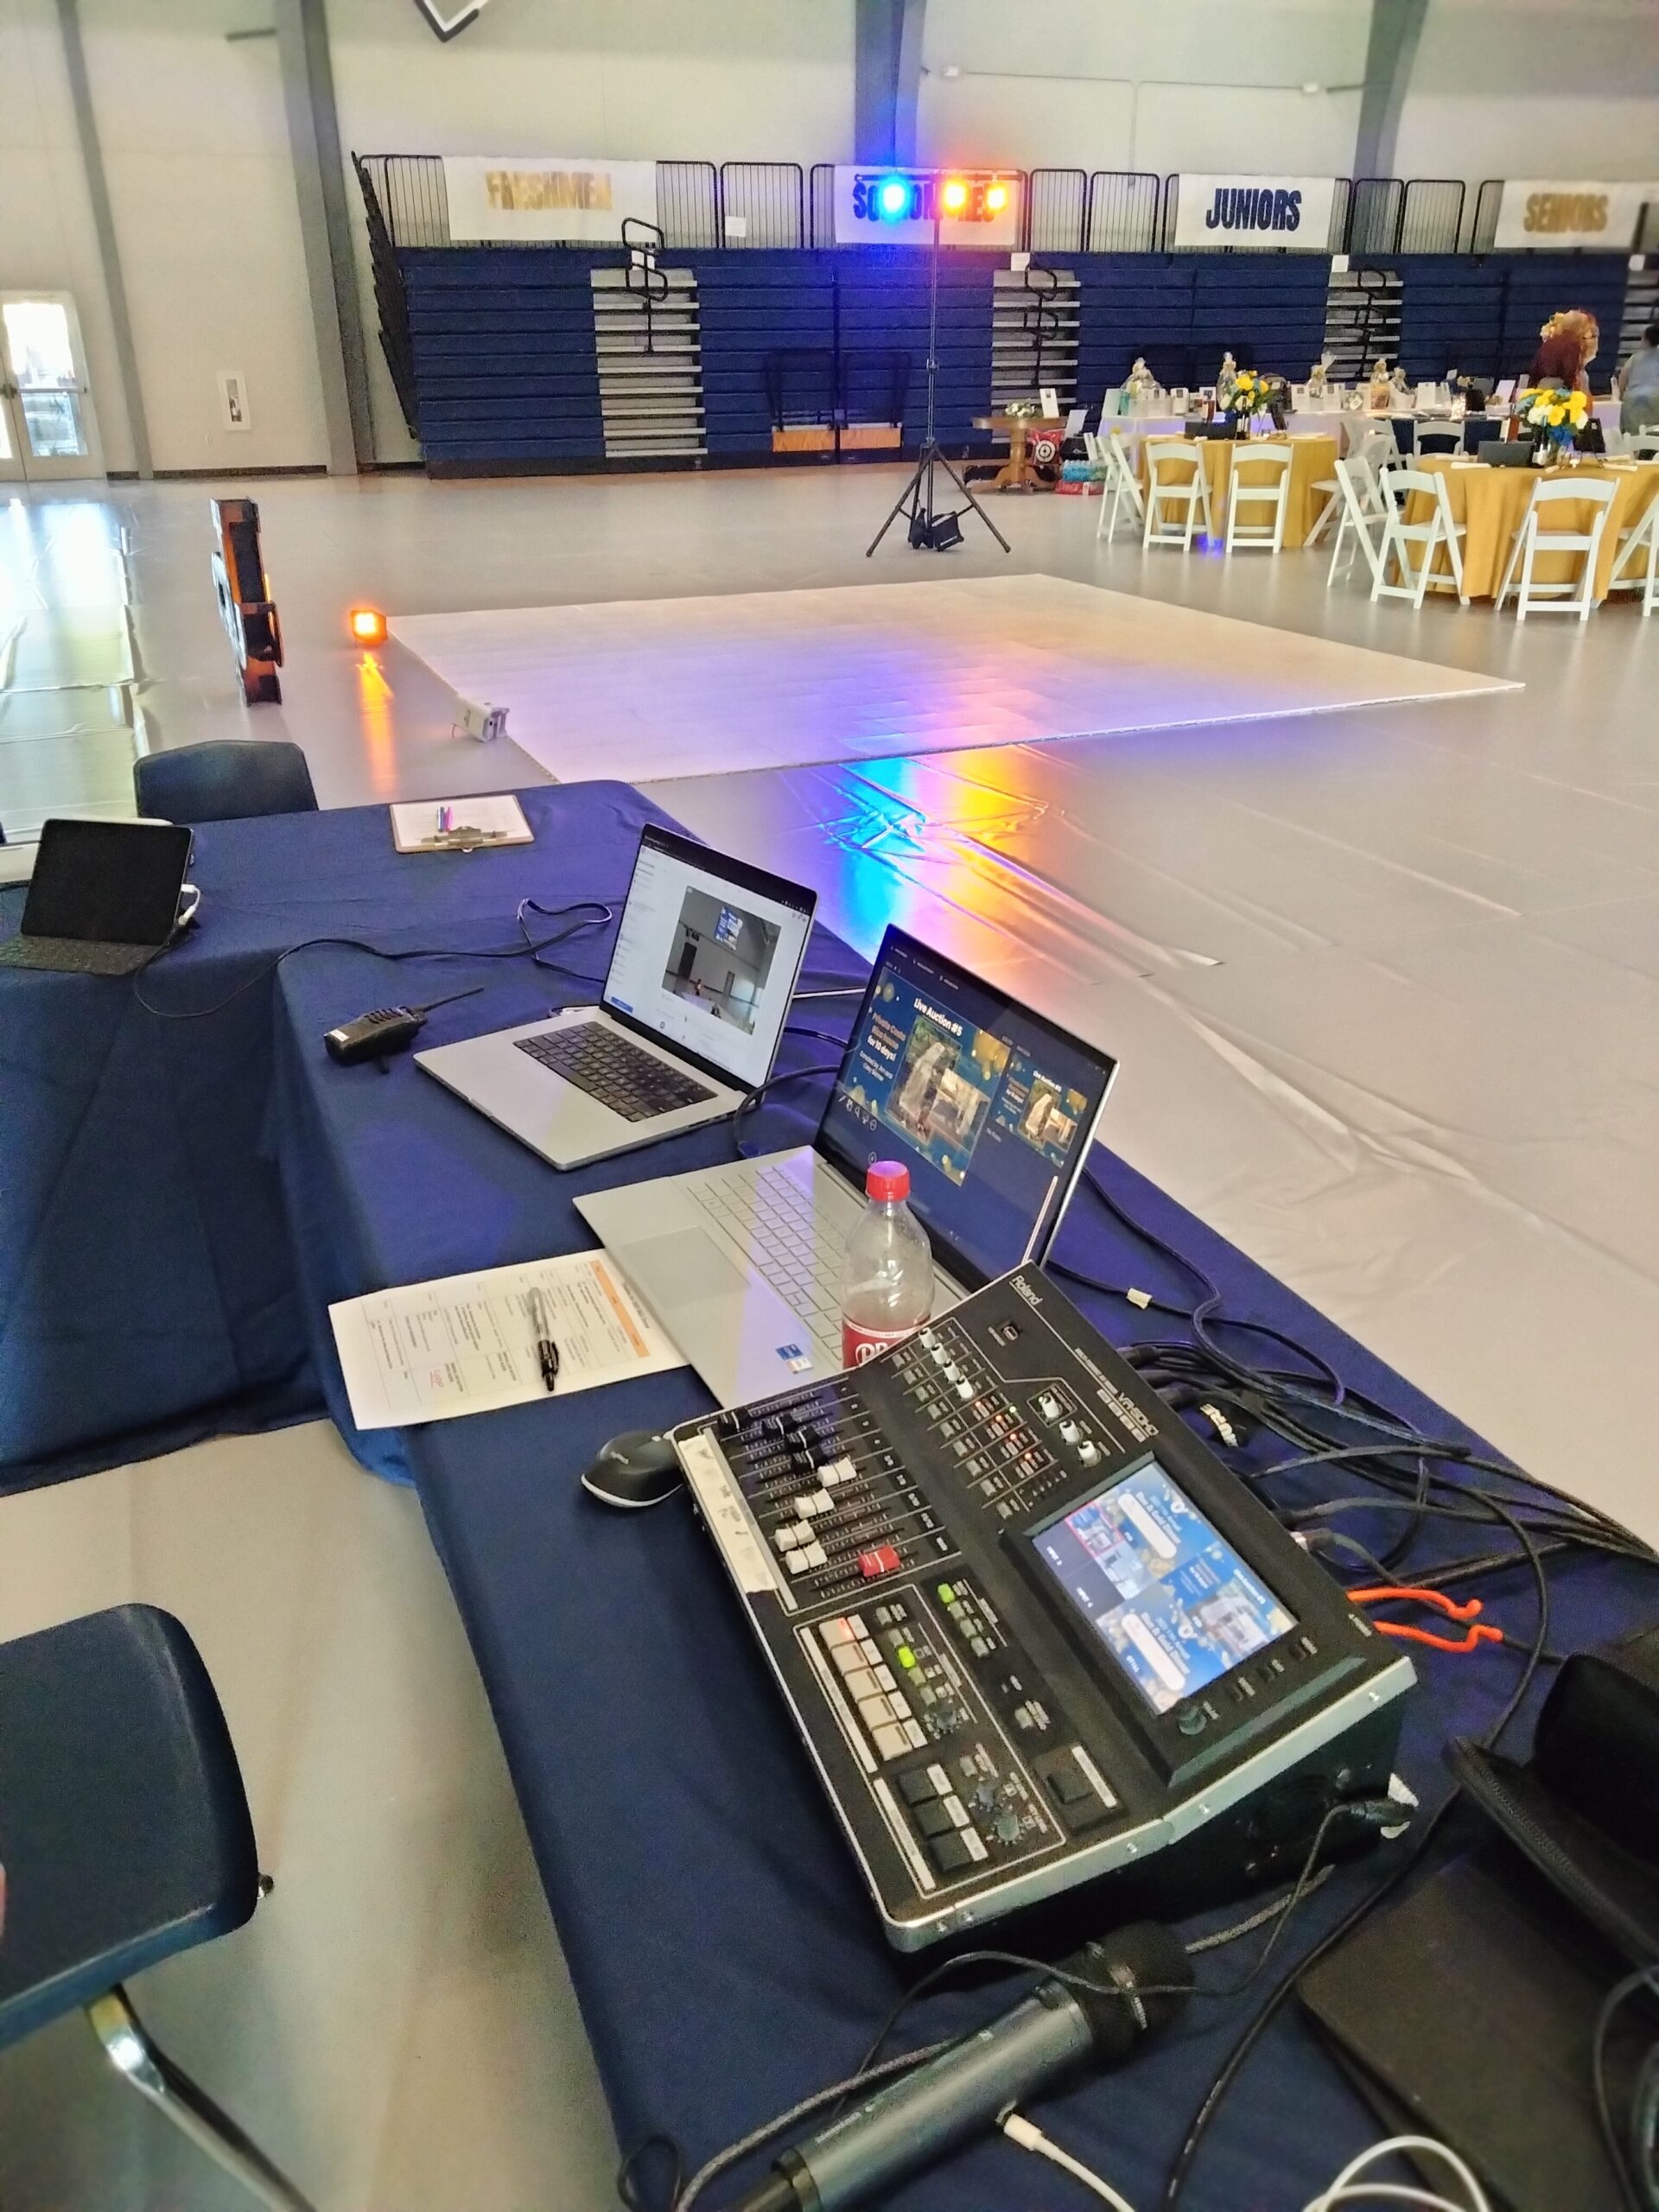 Audio video mixer with computers and a dance floor in the background